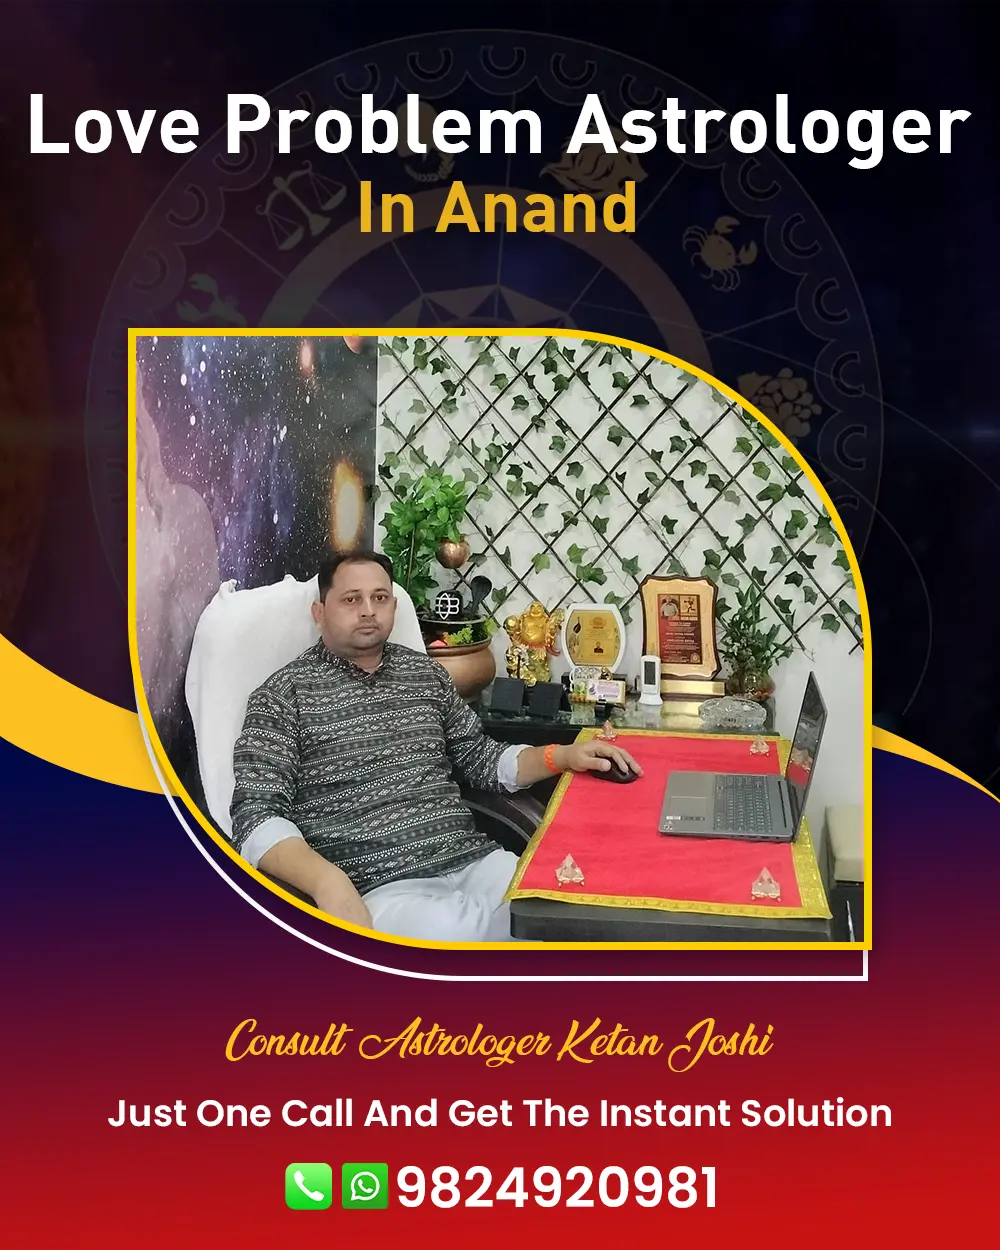 Love Problem Astrologer In Anand